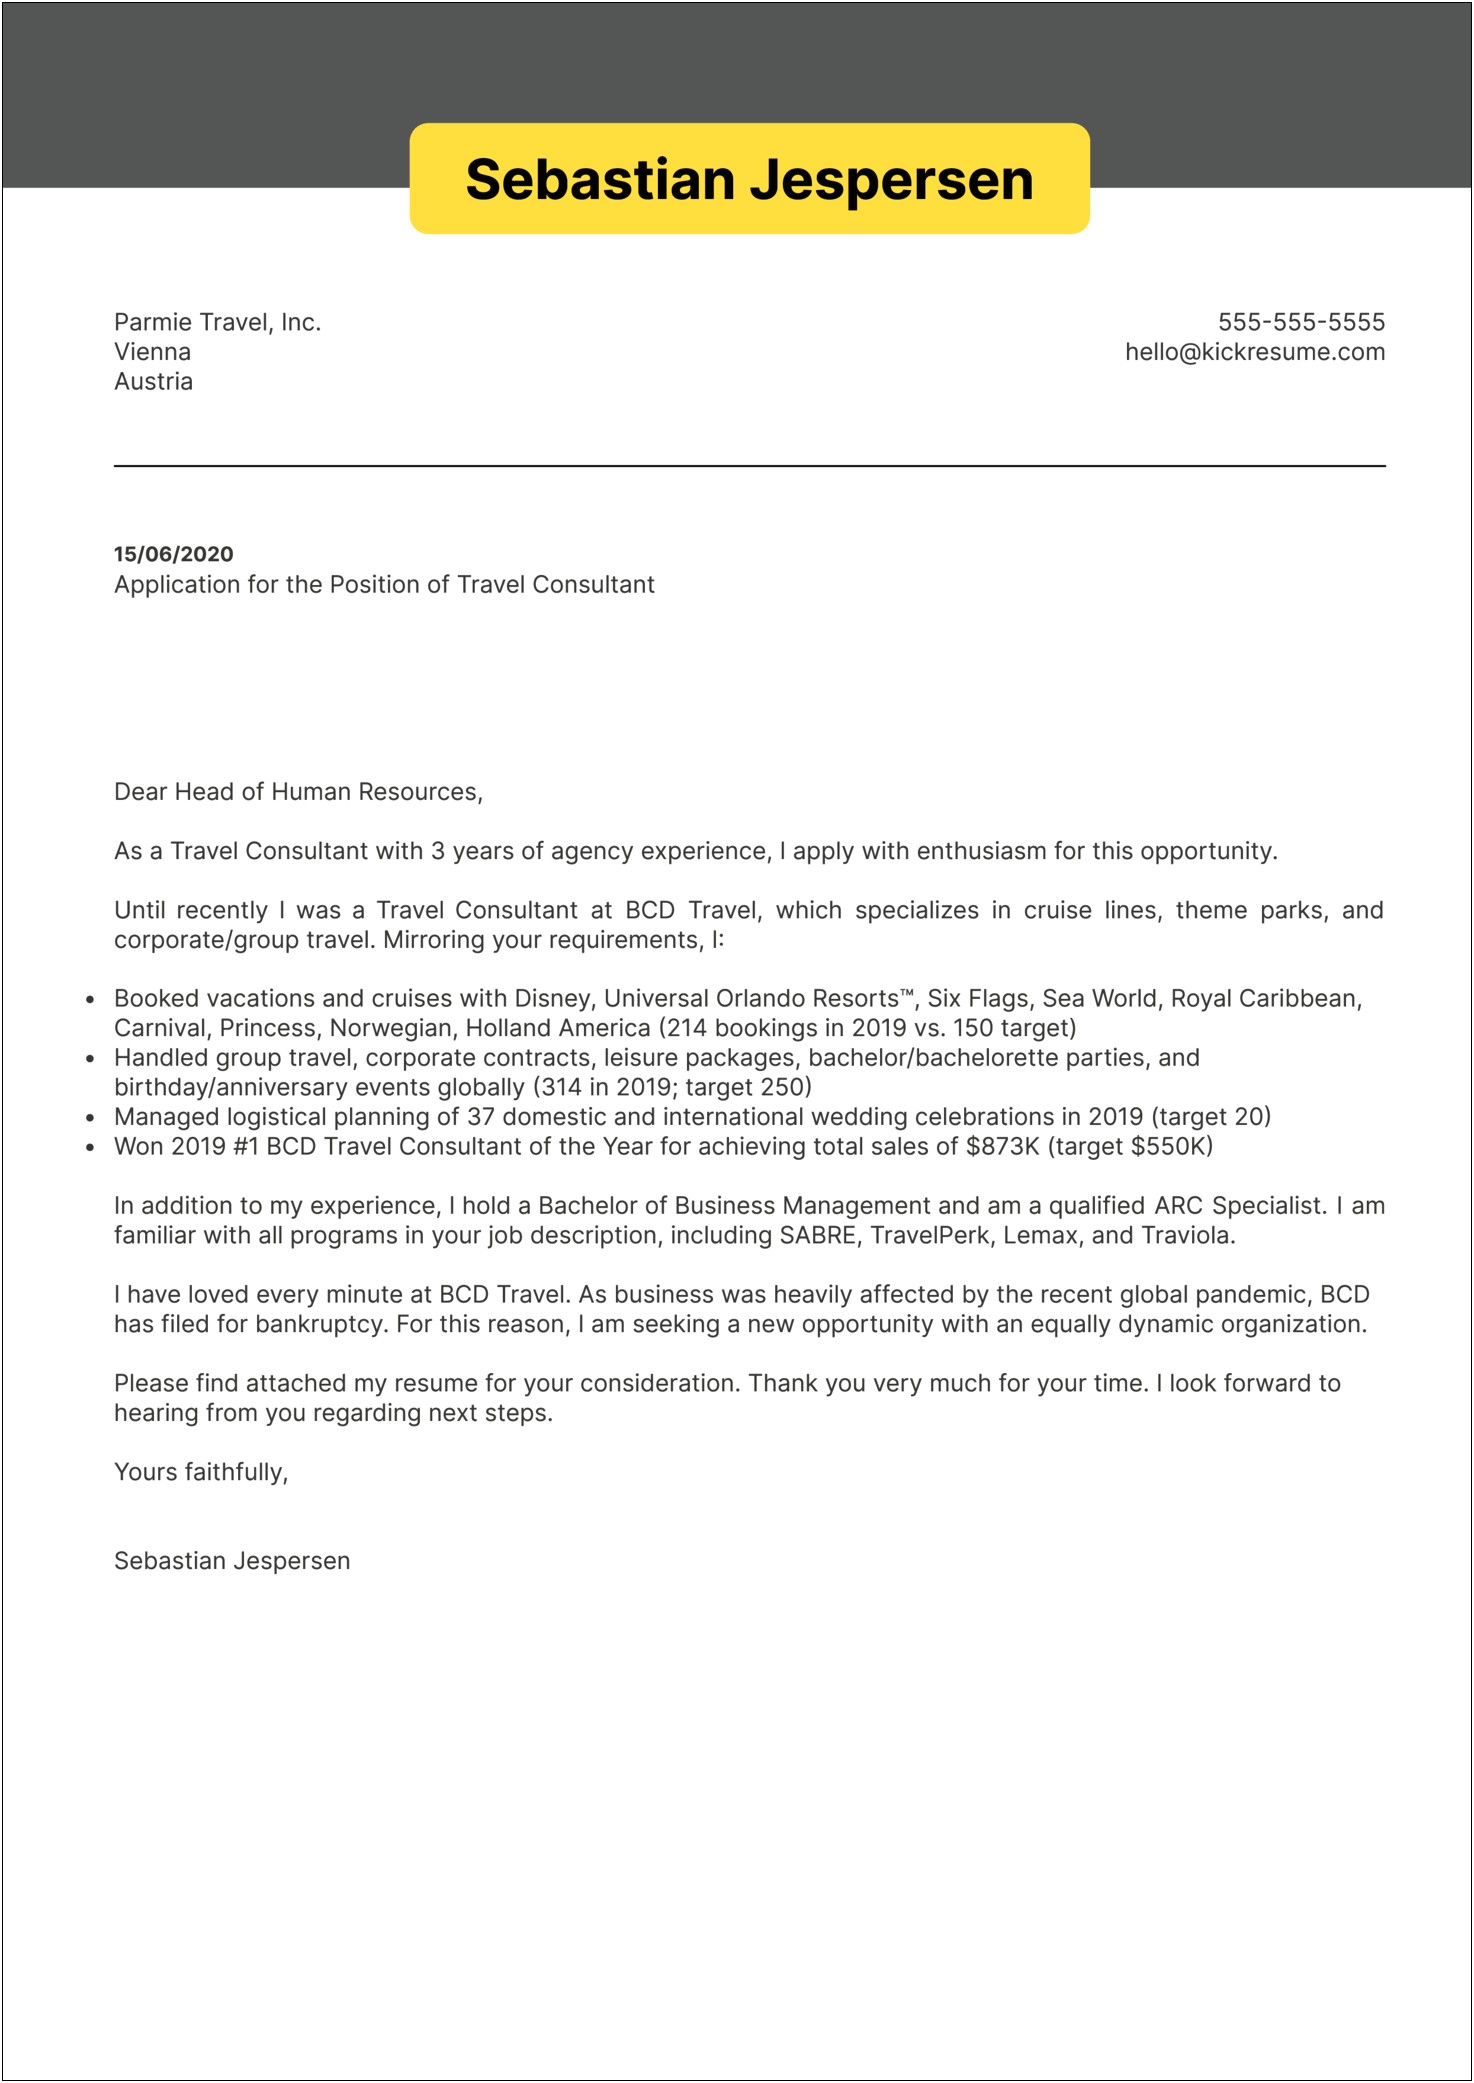 Free Handyman Service Cover Letter Template